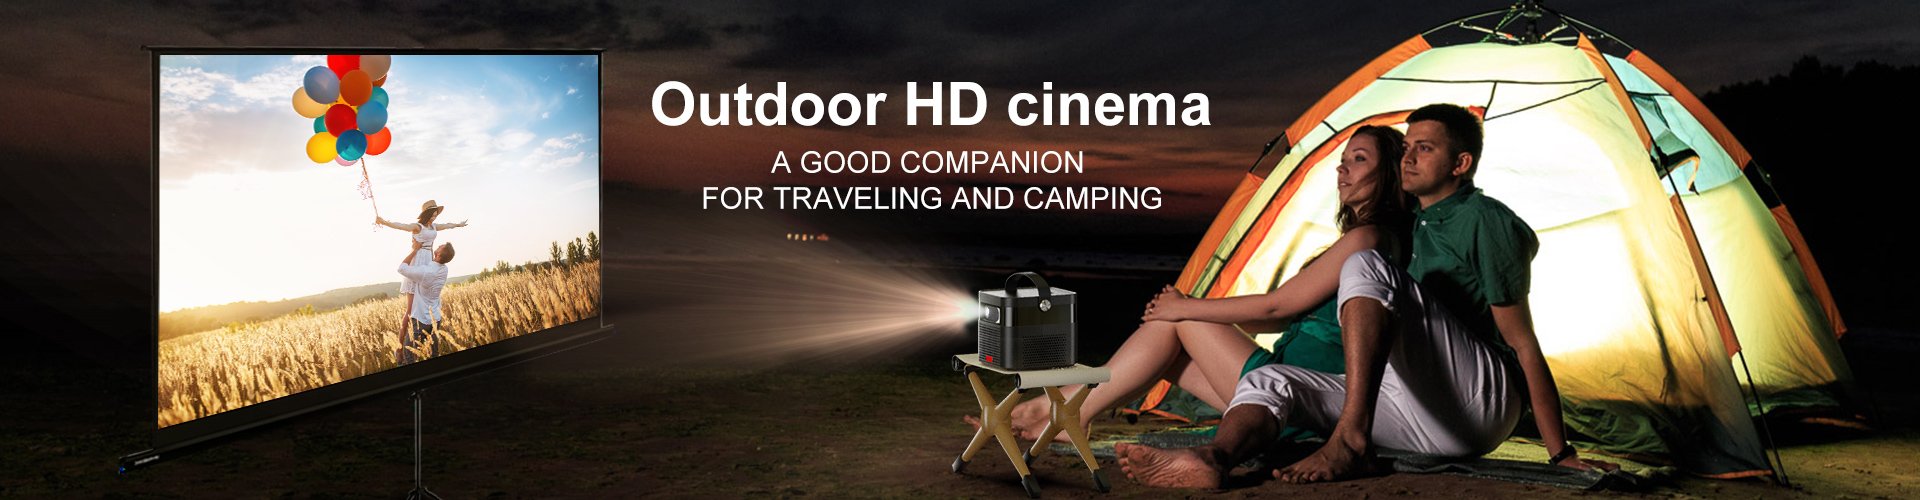 Toumei K5 Smart 3D Battery Projector for outdoor movie